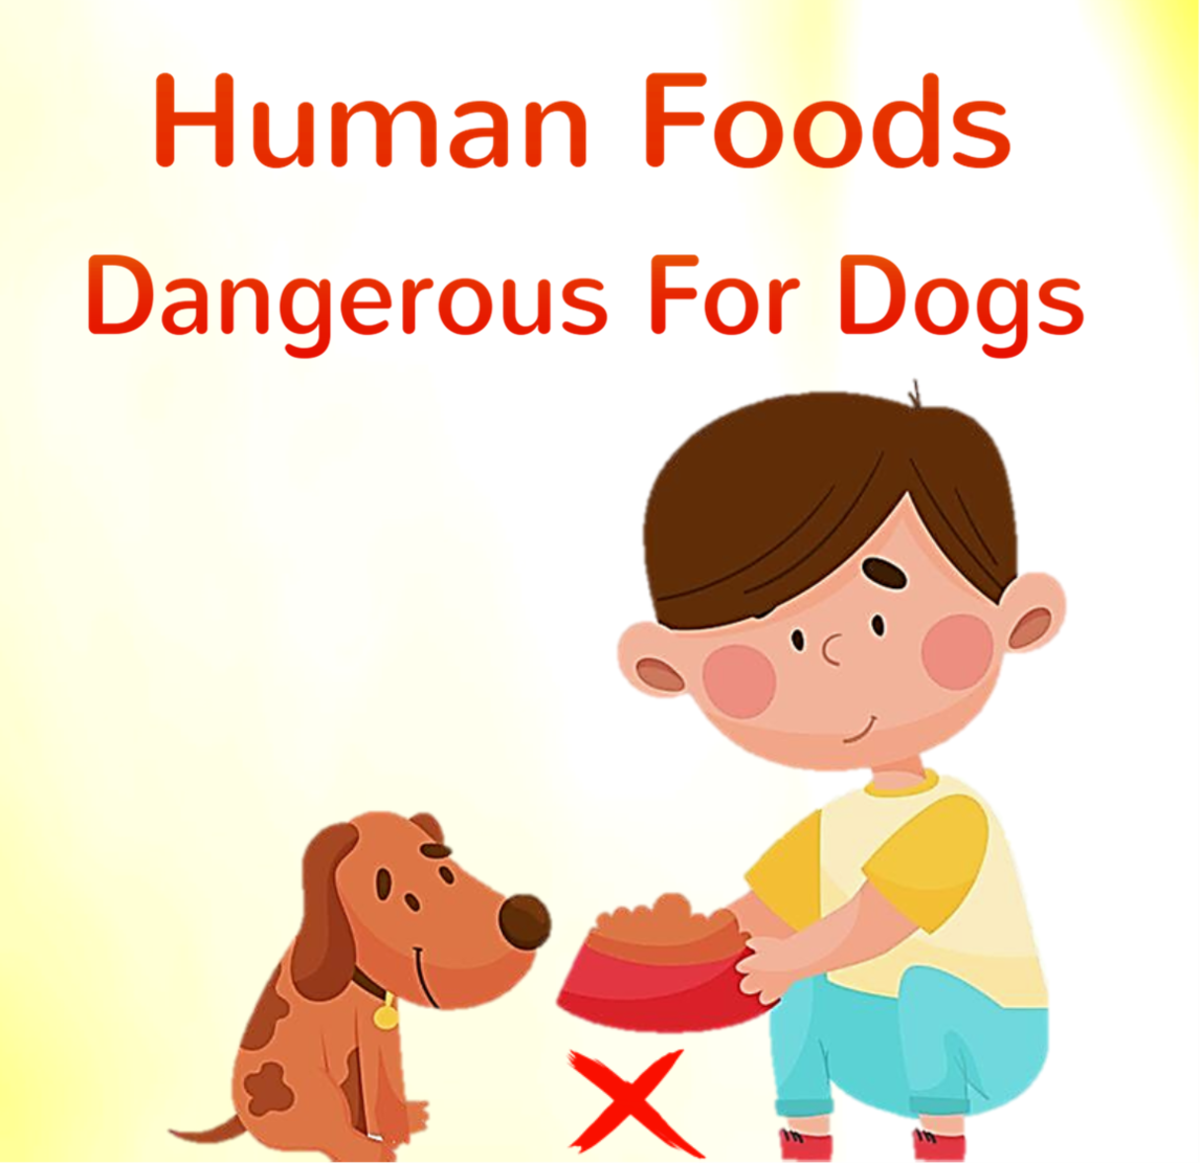 15 Human Foods That Are Dangerous for Dogs